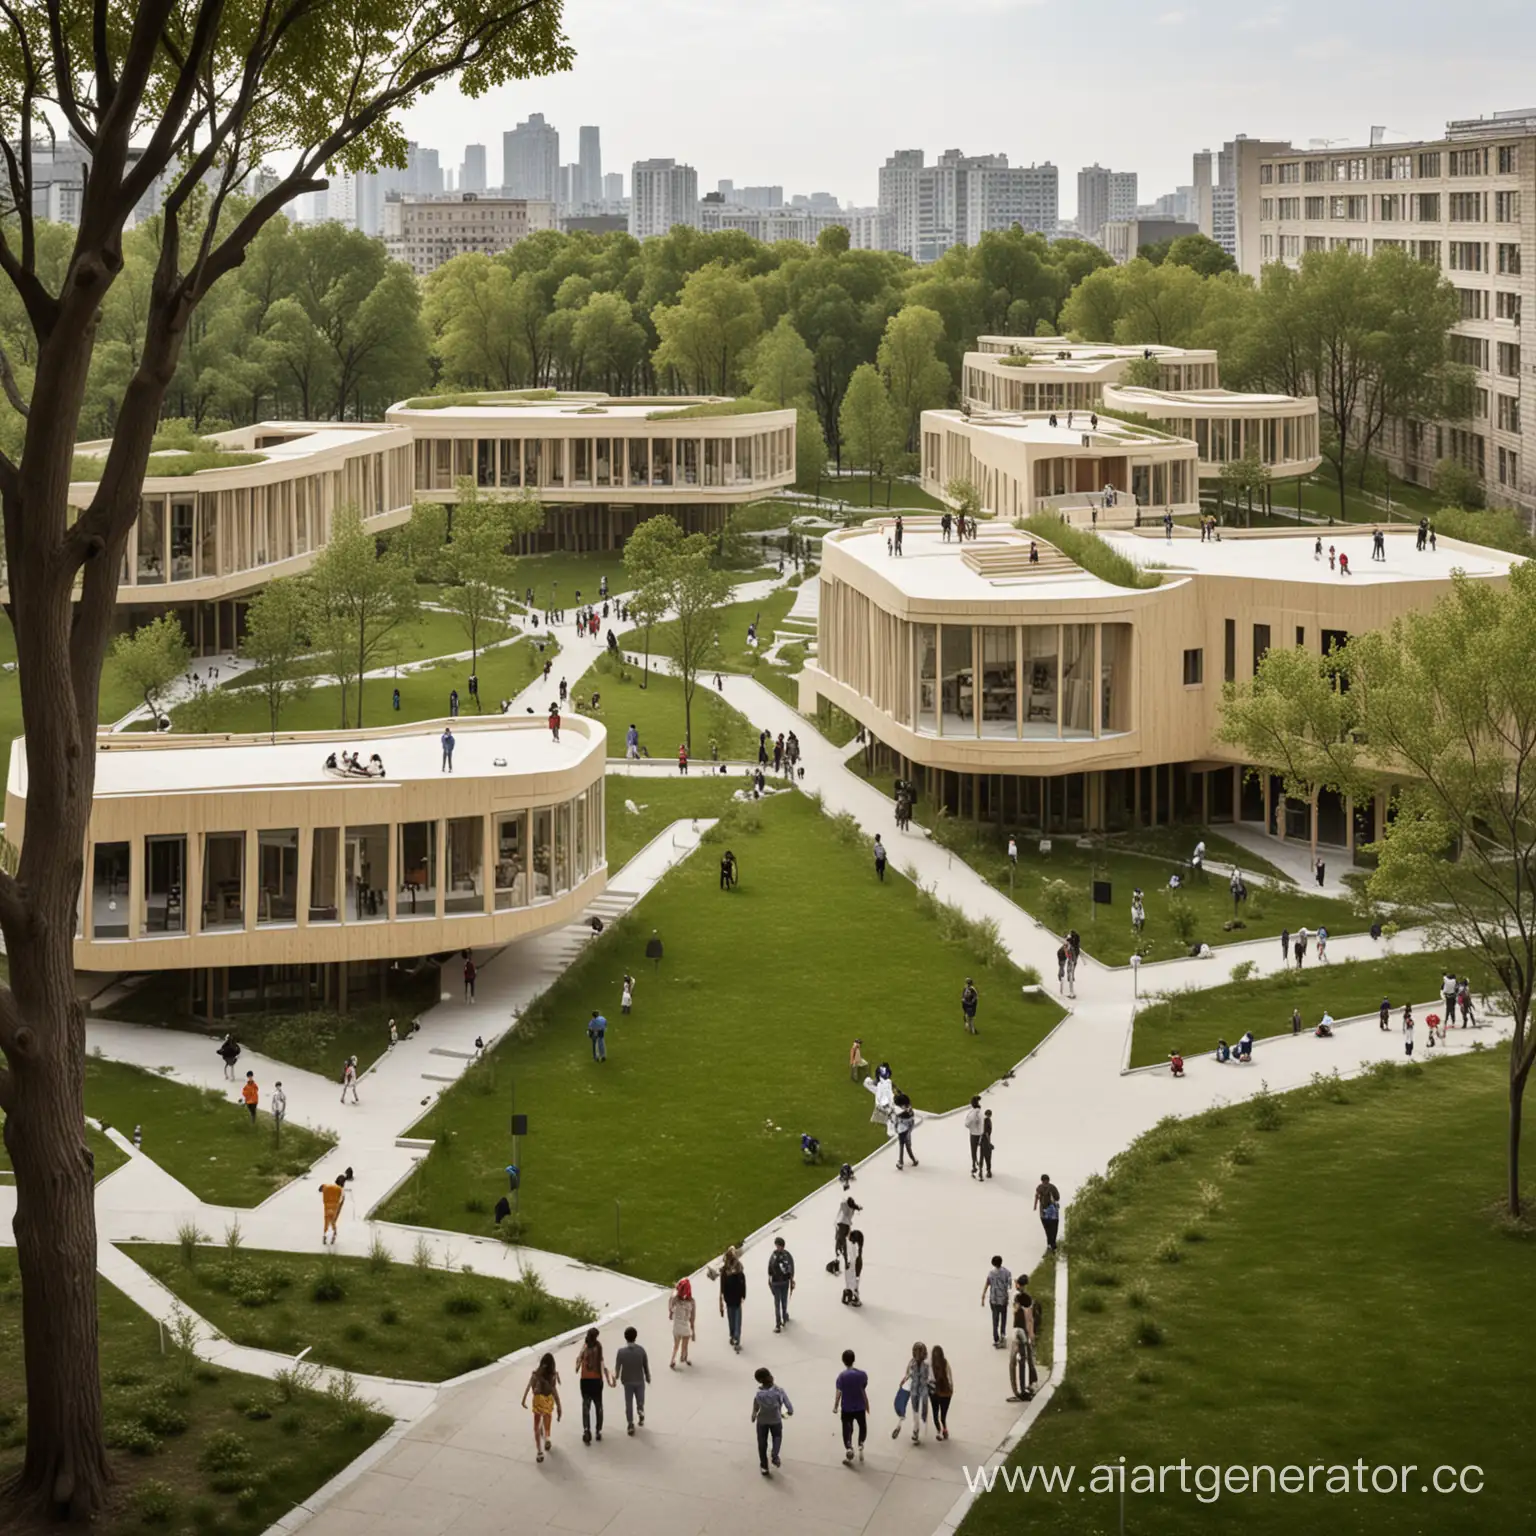 Urban-School-with-Unique-Architecture-and-Lush-Park-Surroundings